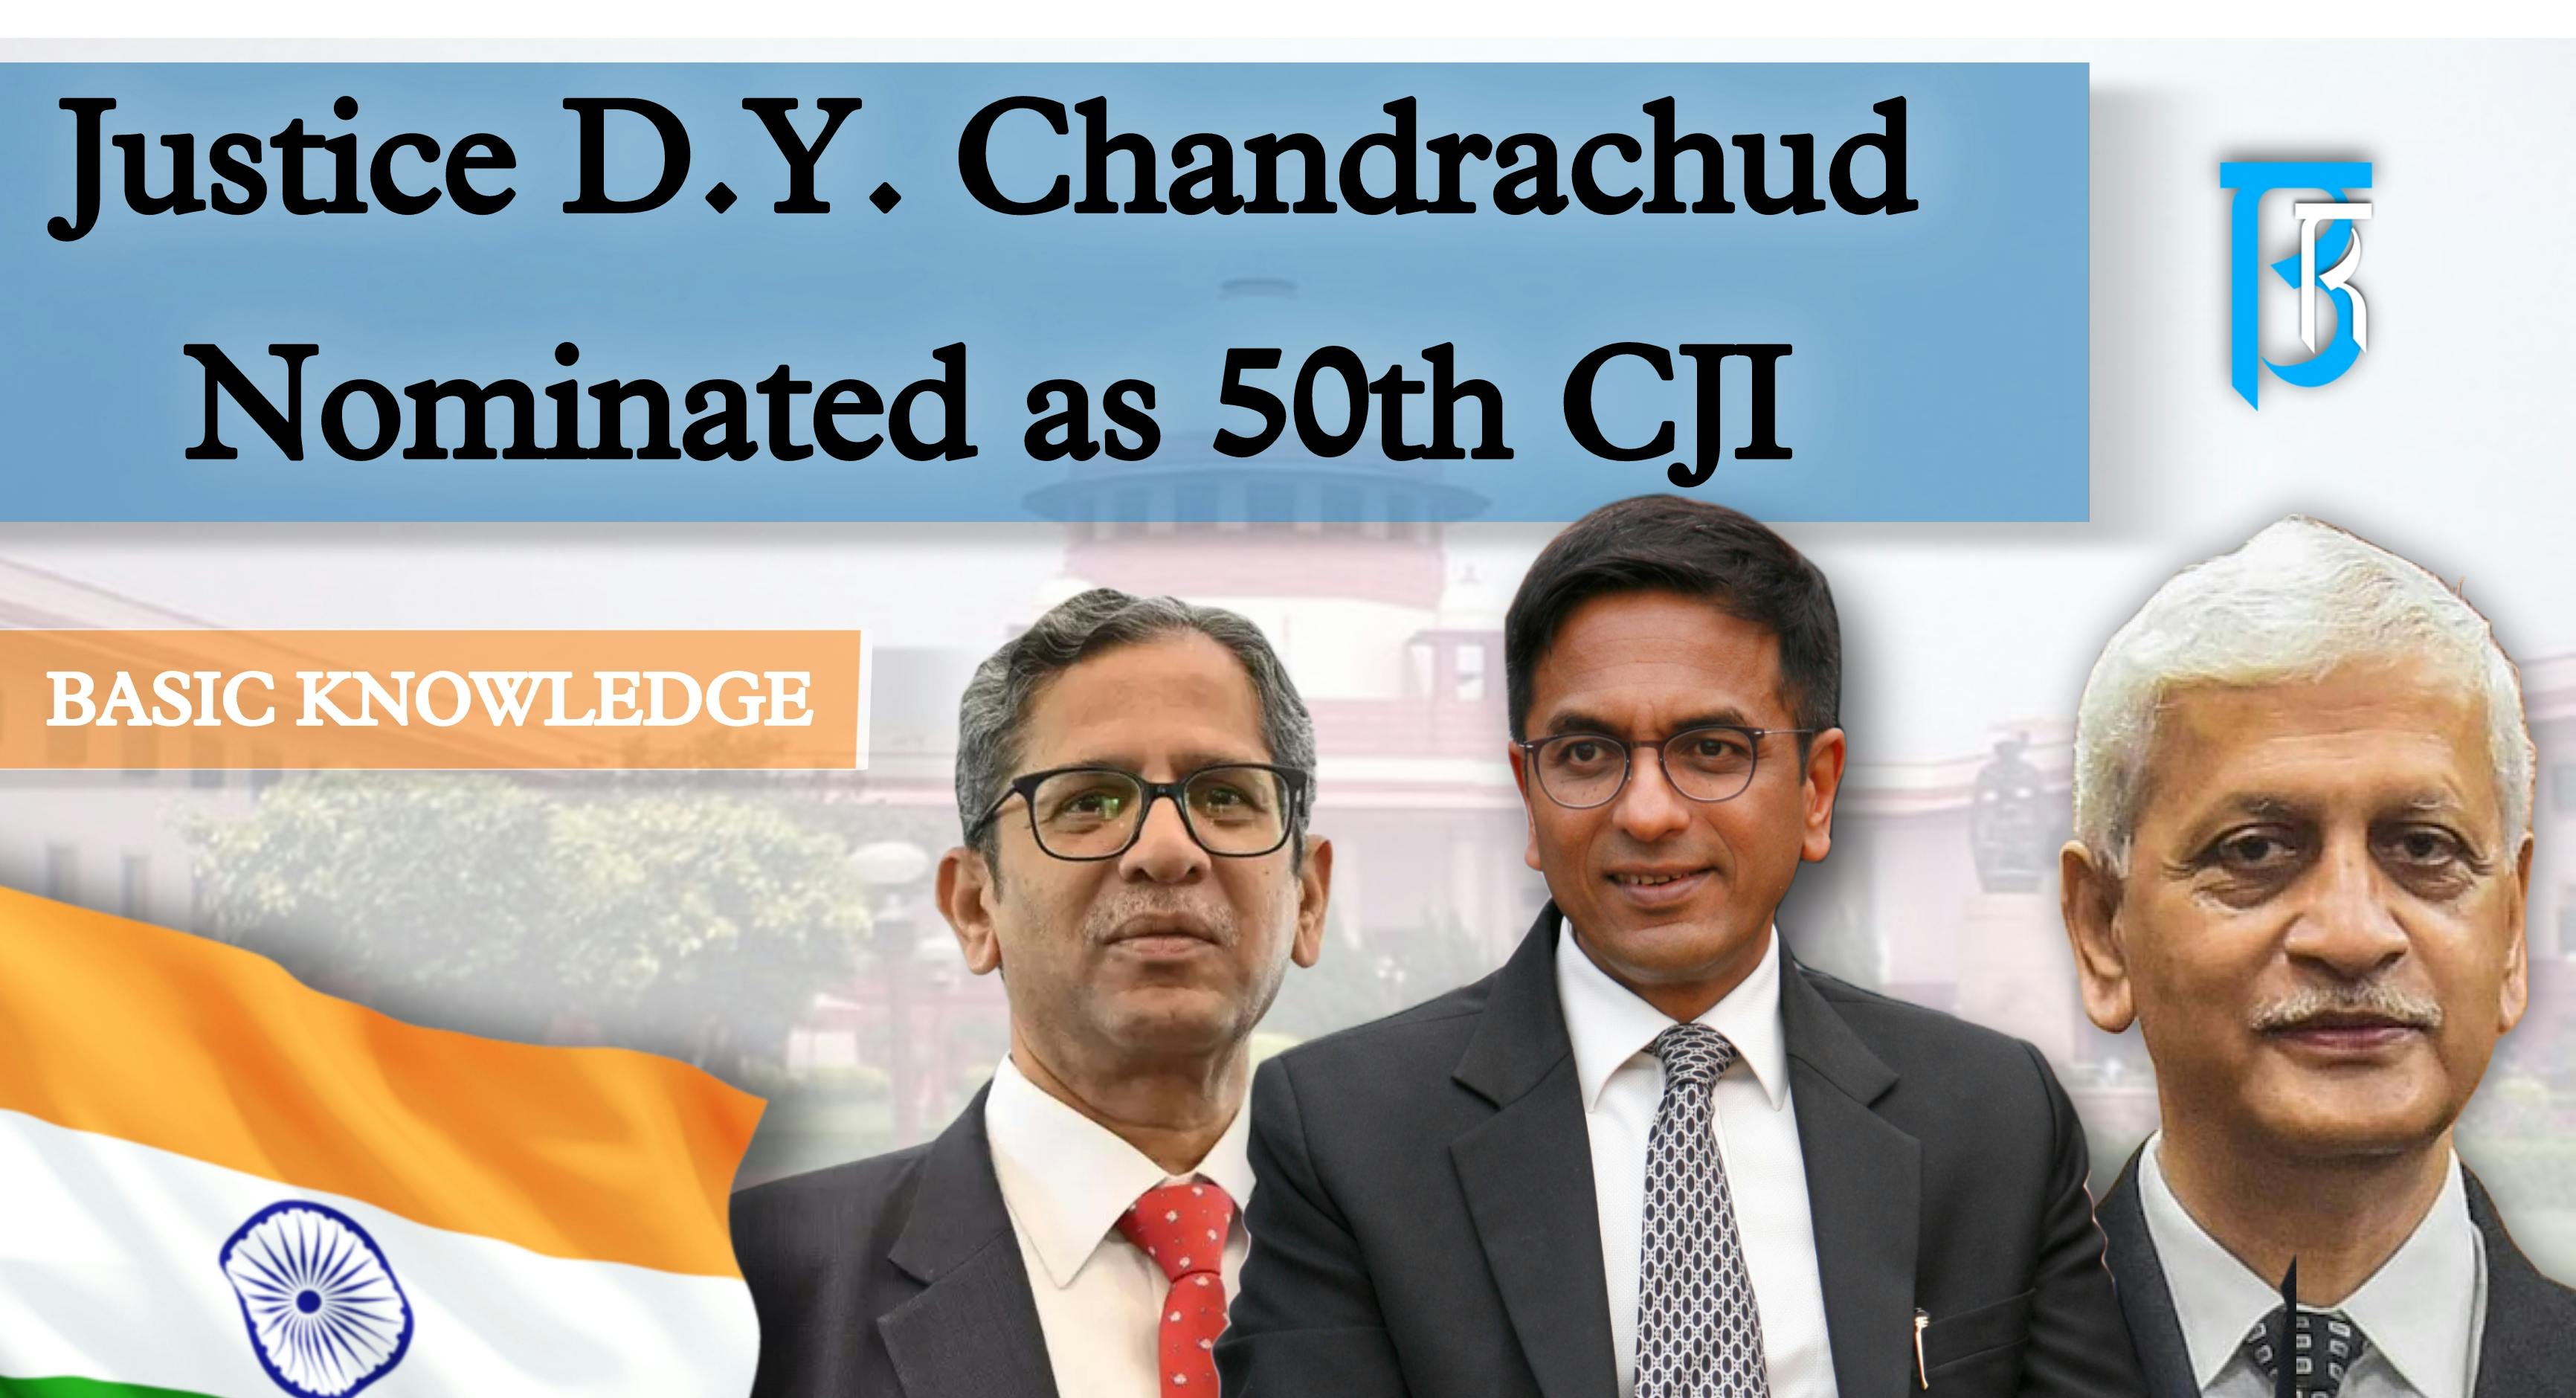 Cover Image for Justice D.Y. Chandrachud Nominated as 50th CJI